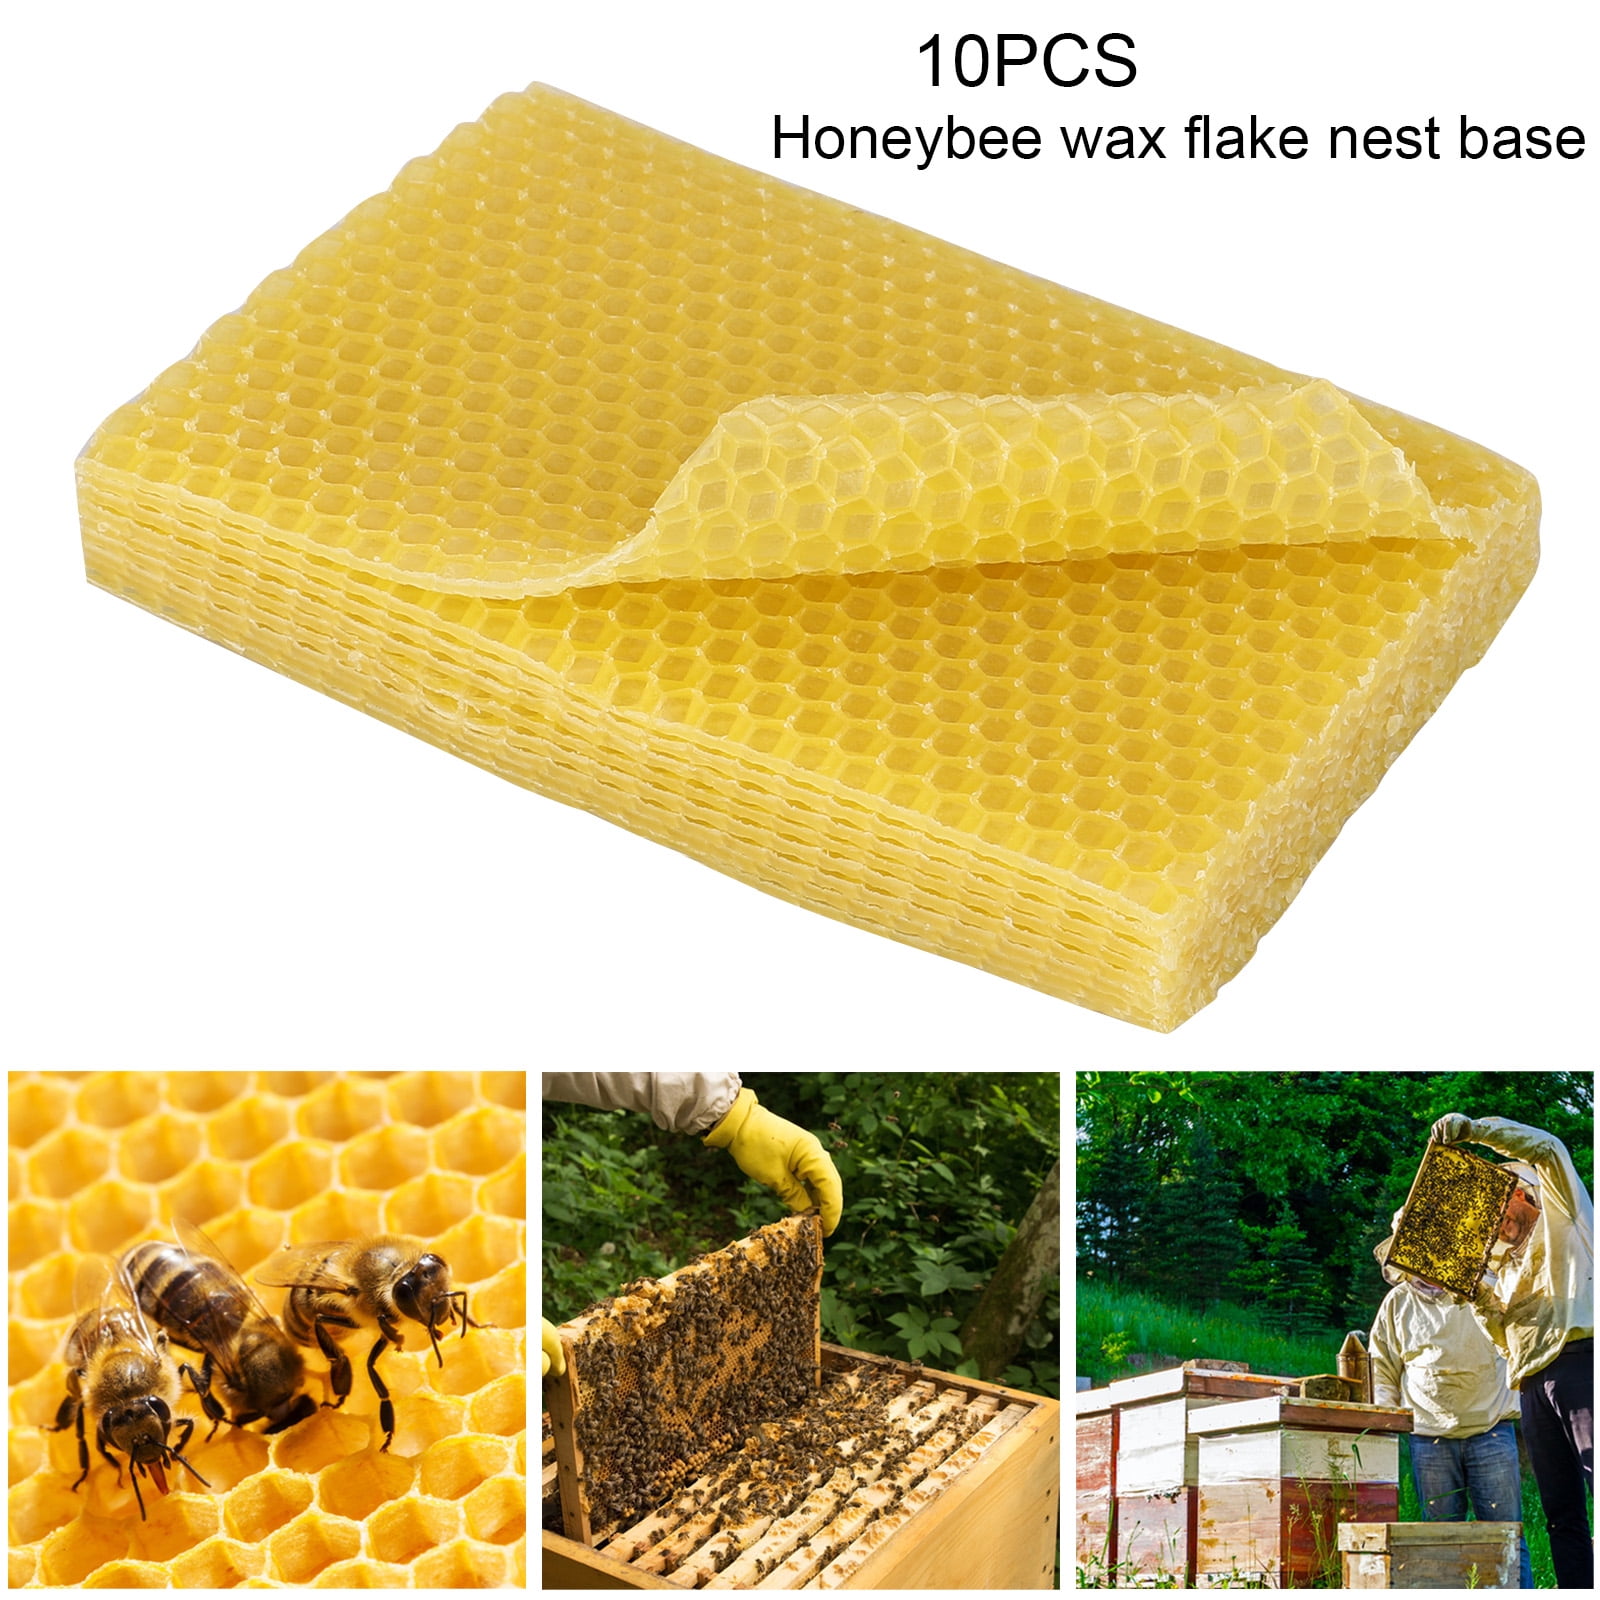 etc Furniture Polish Pure and Natural Honeycomb Bee Wax Foundation Beehive Wax Frames Base Sheets Bee Comb Honey Frame for Beekeepers Perfect for DIY Projects Like Candle Making Crafts